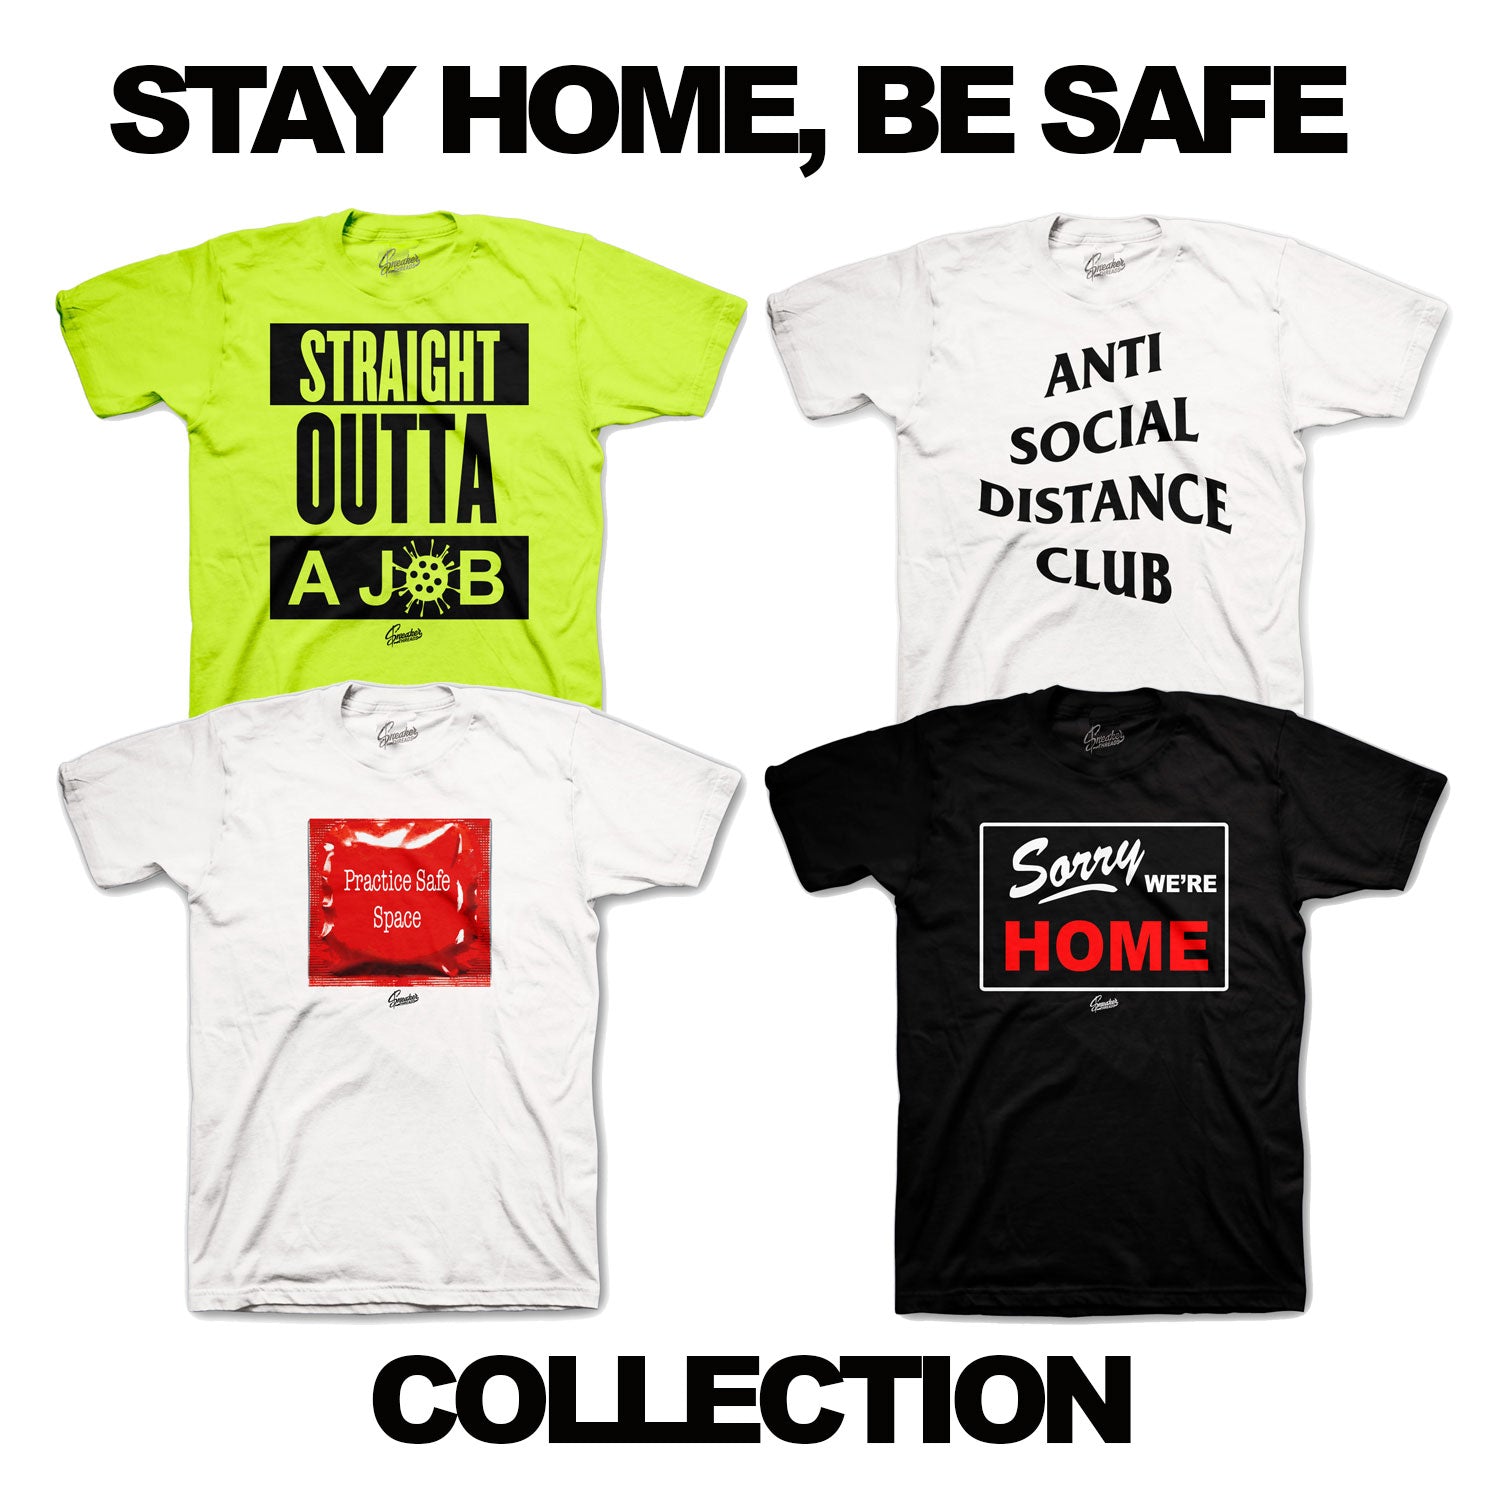 Stay Home, Be Safe Collection